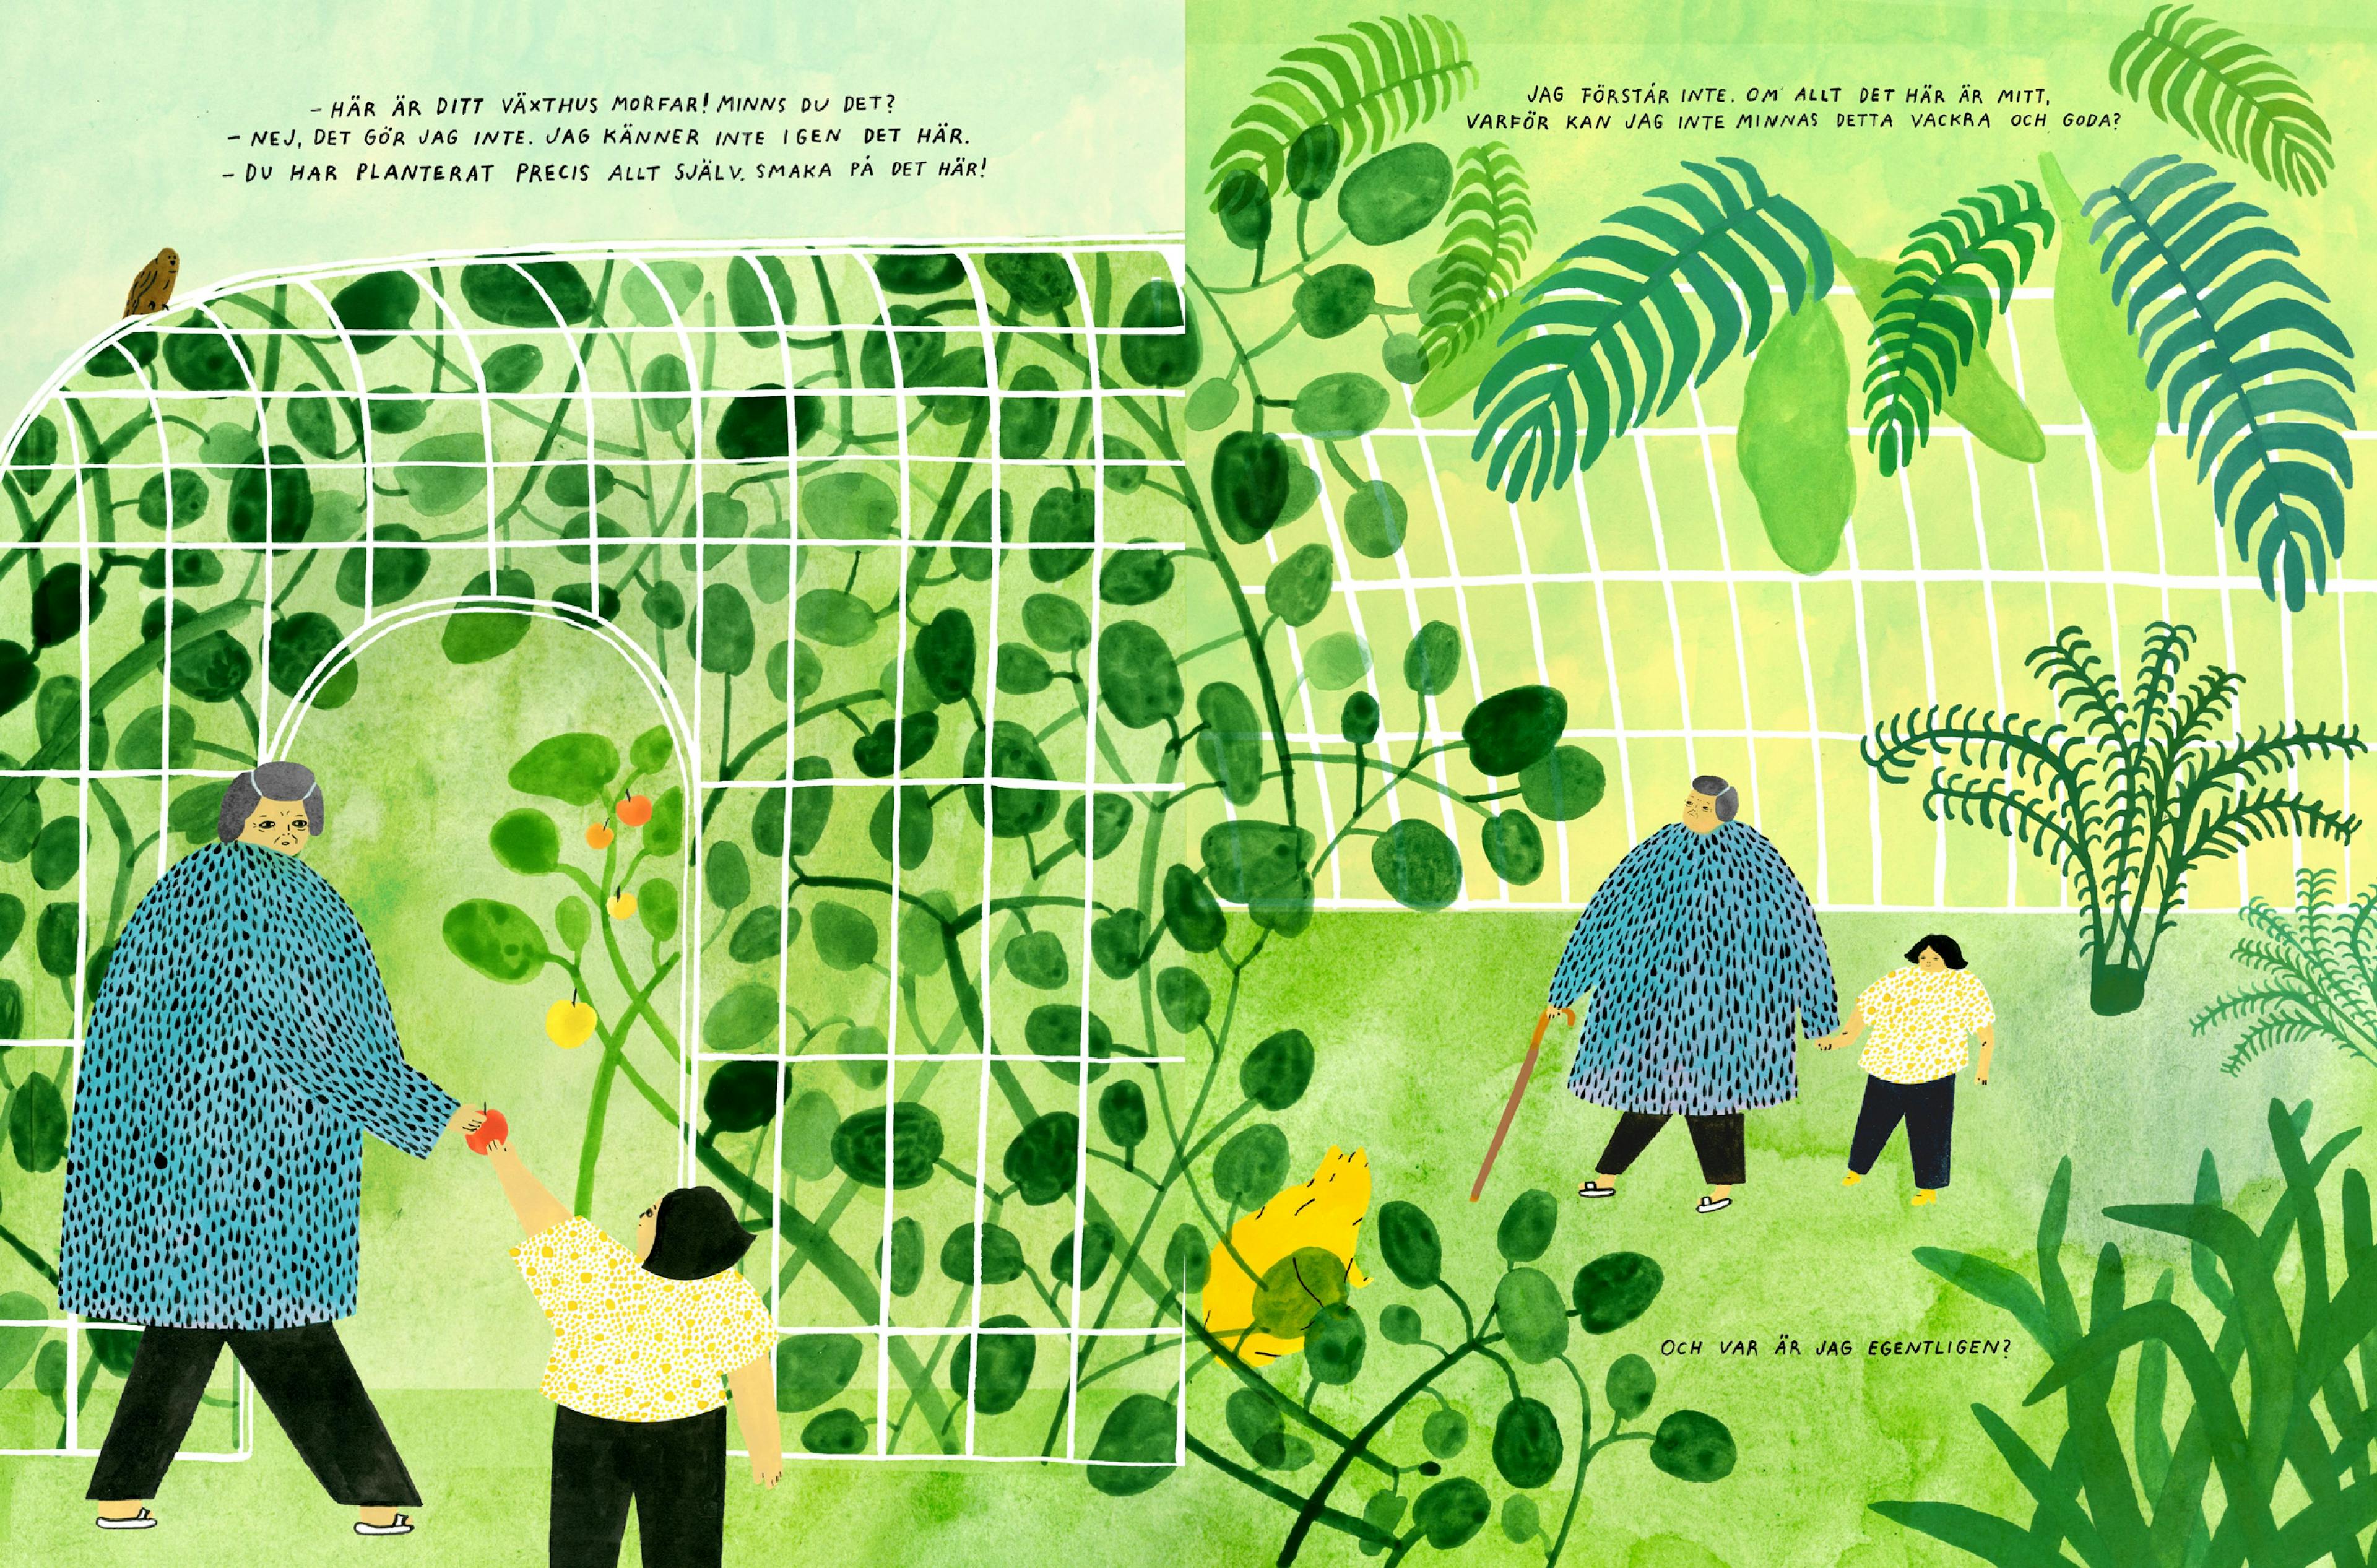 From the book "Today I don't know who I am". Two characters enter a large greenhouse with masses of plants covering the screen